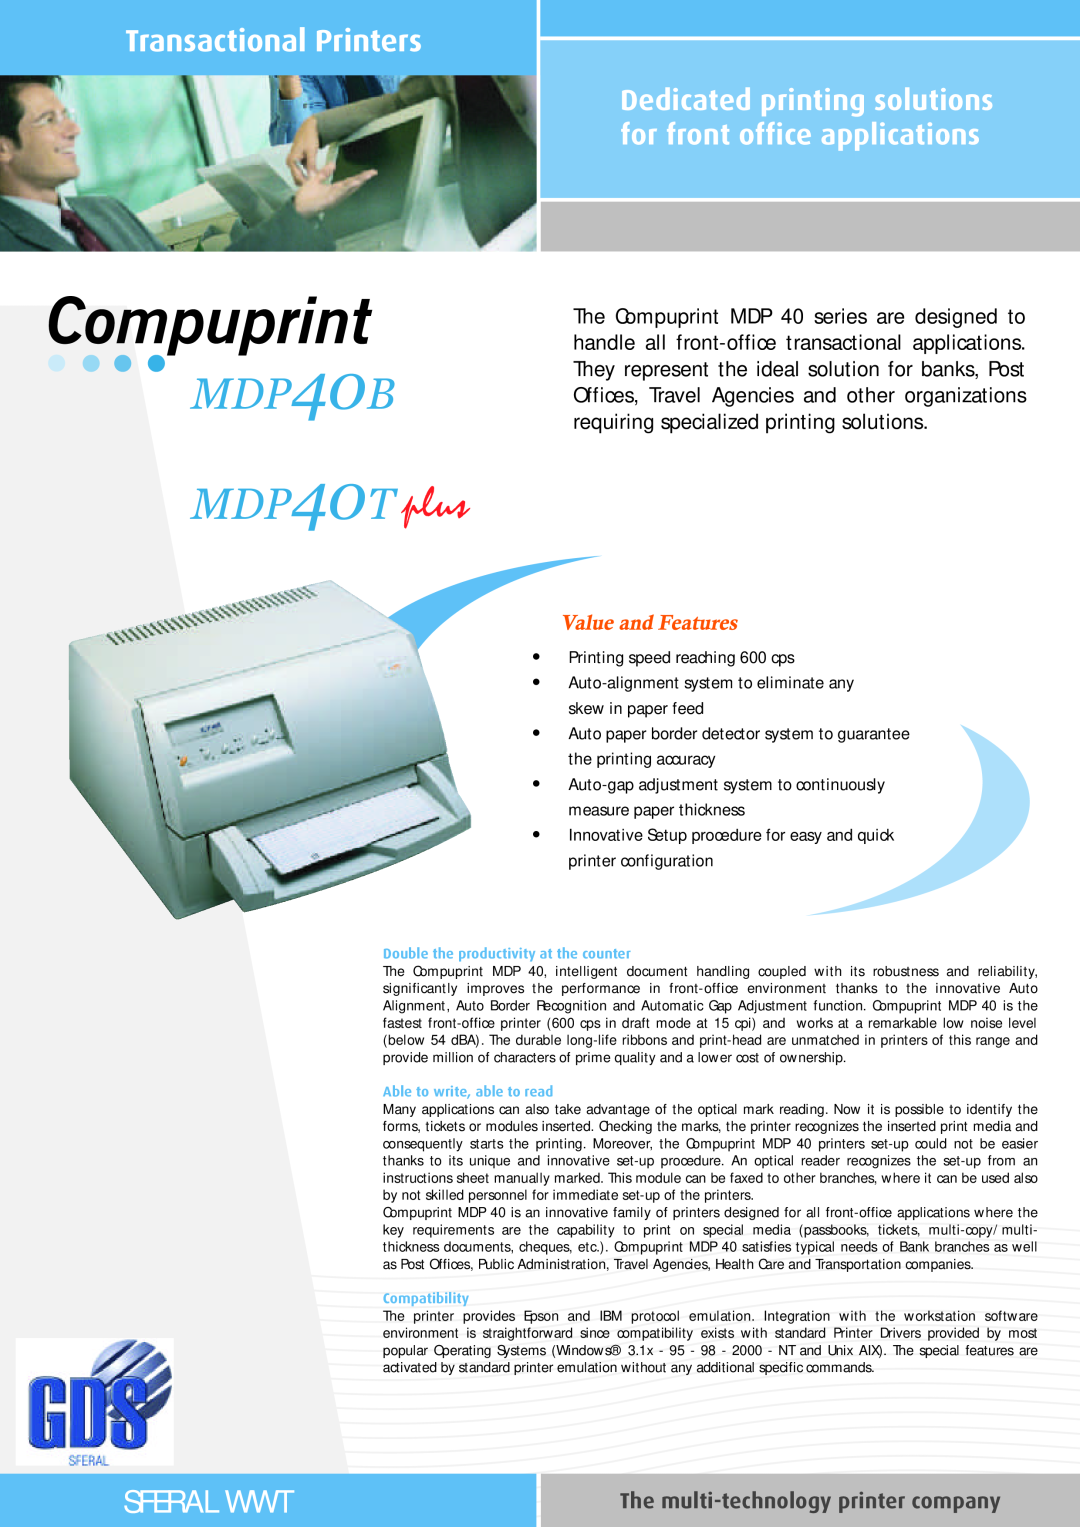 Epson manual Transactional Printers, Sferal Wwt, The multi-technology printer company, MDP40B MDP40T ‘š˜, Compatibility 